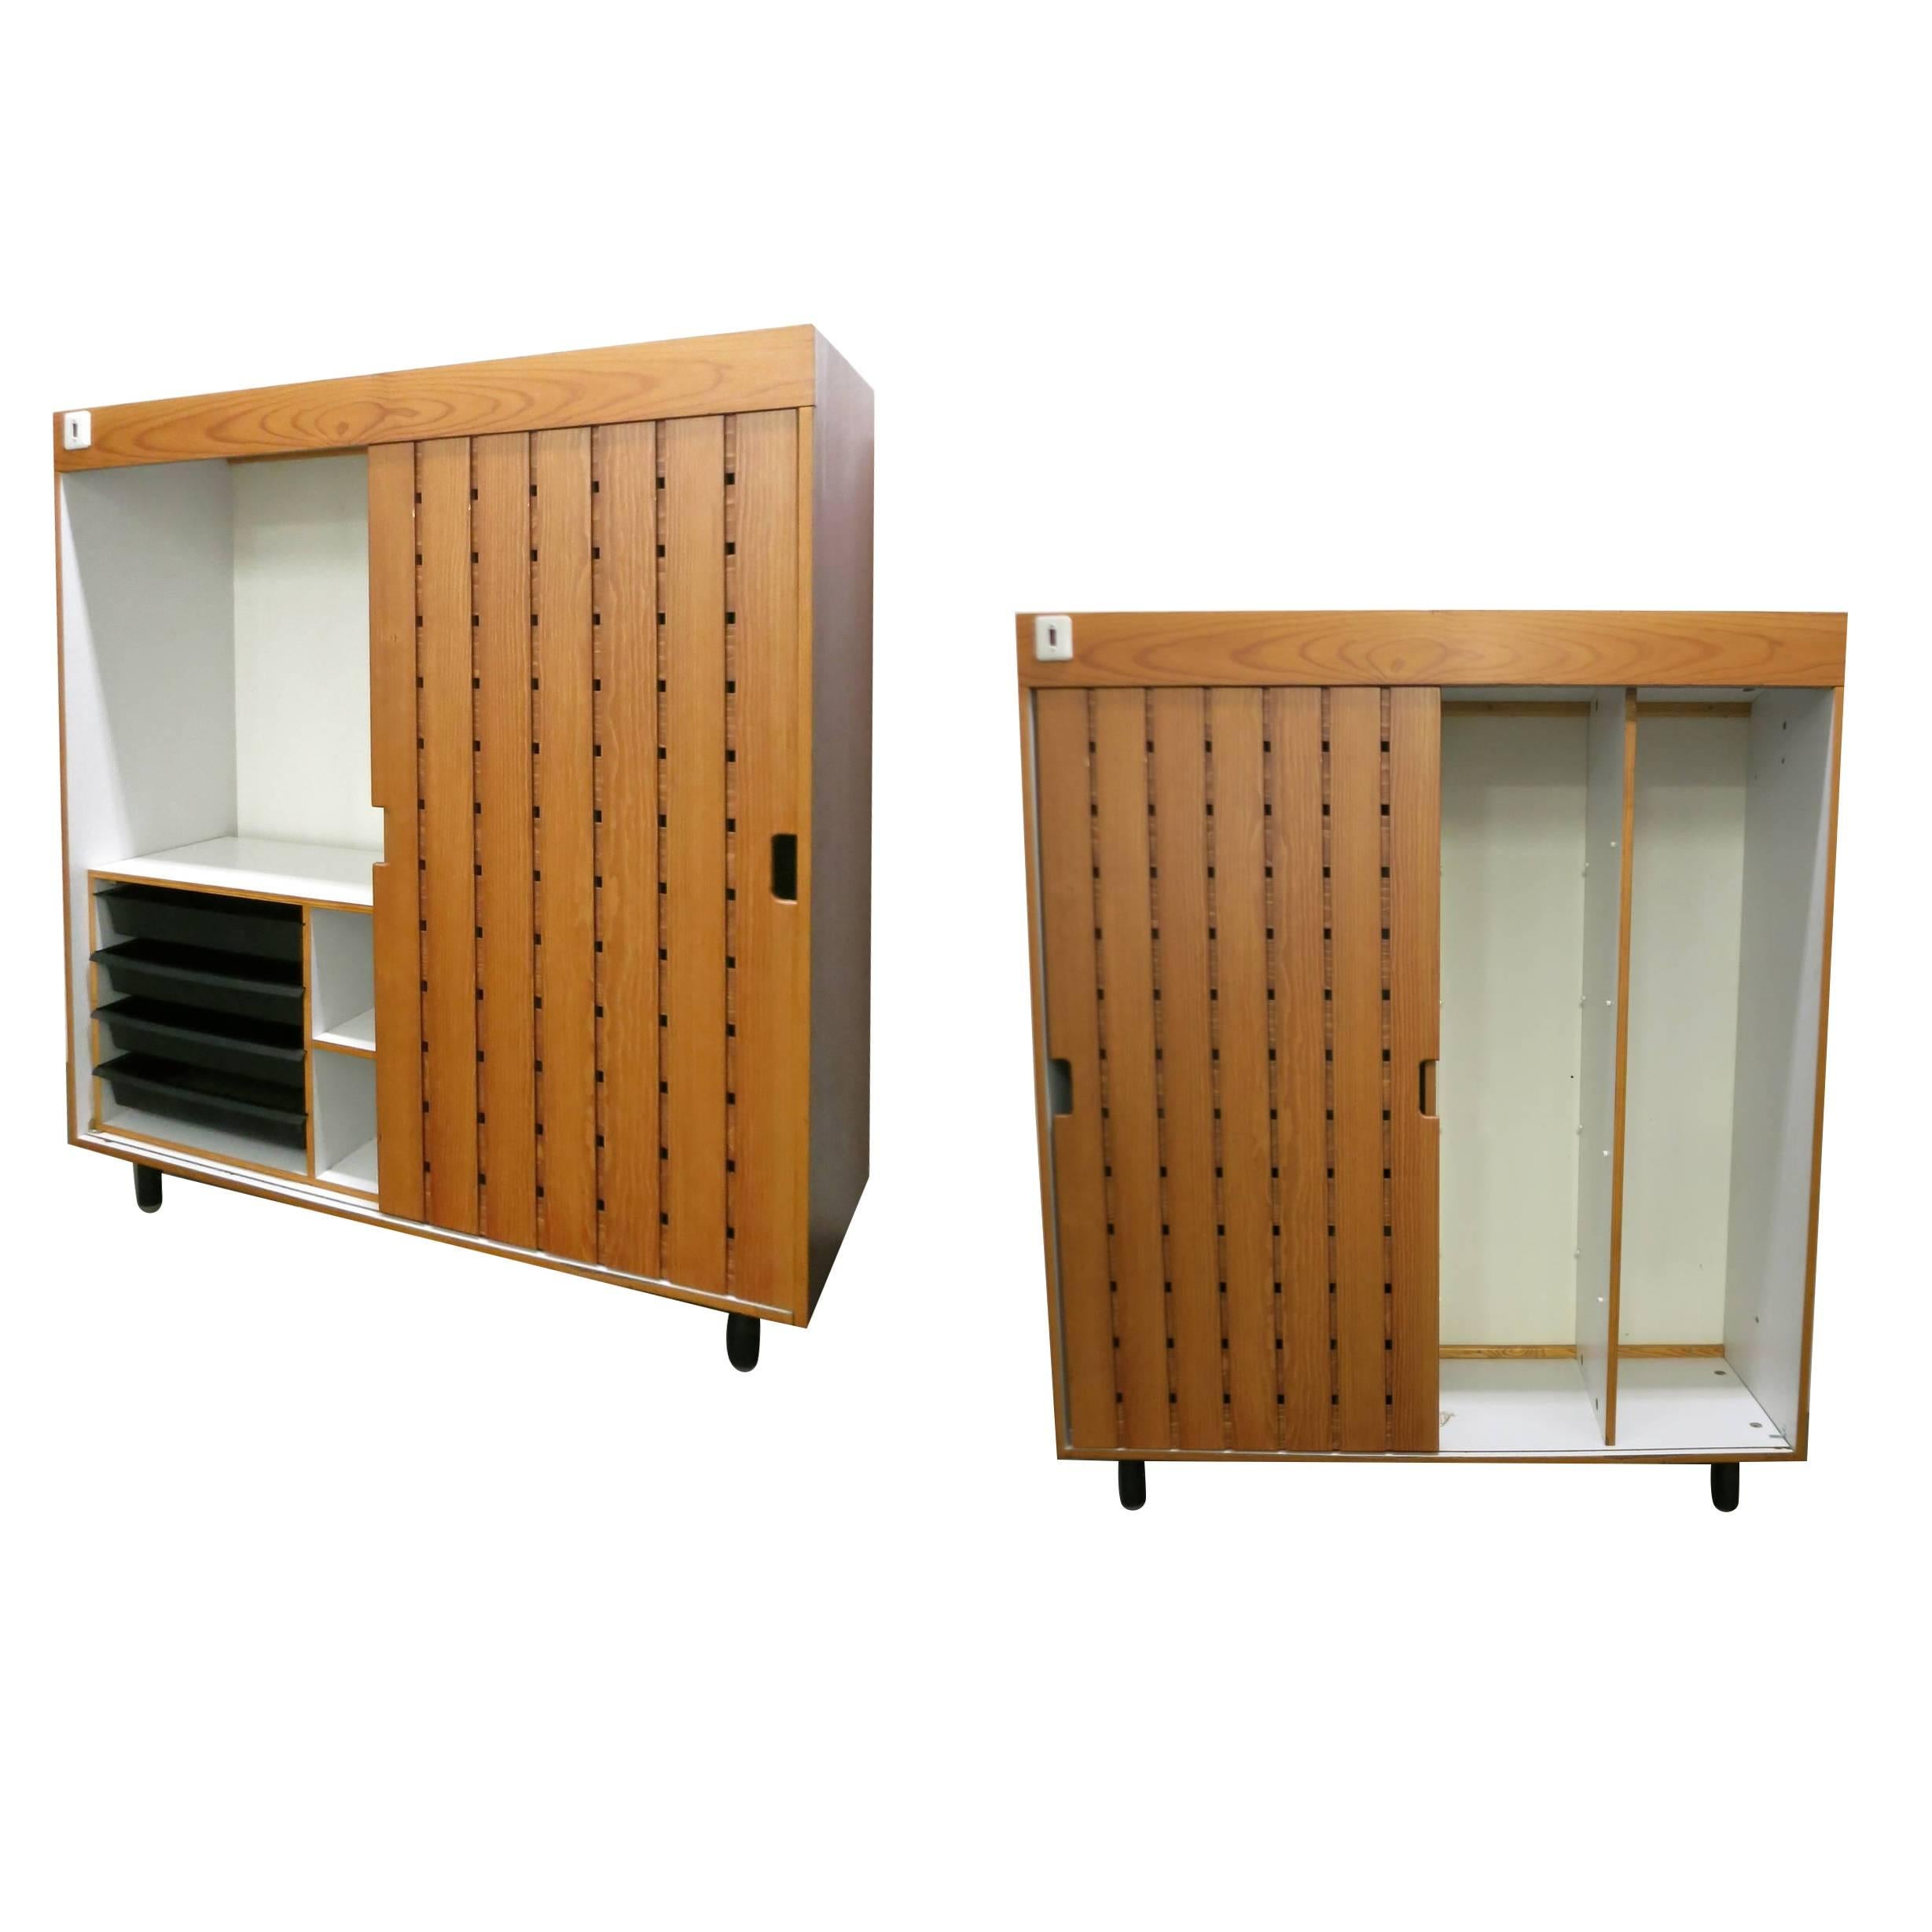 Pair of Wardrobes by Charlotte Perriand, in 1967 for Les Arc Ski Lodge, France